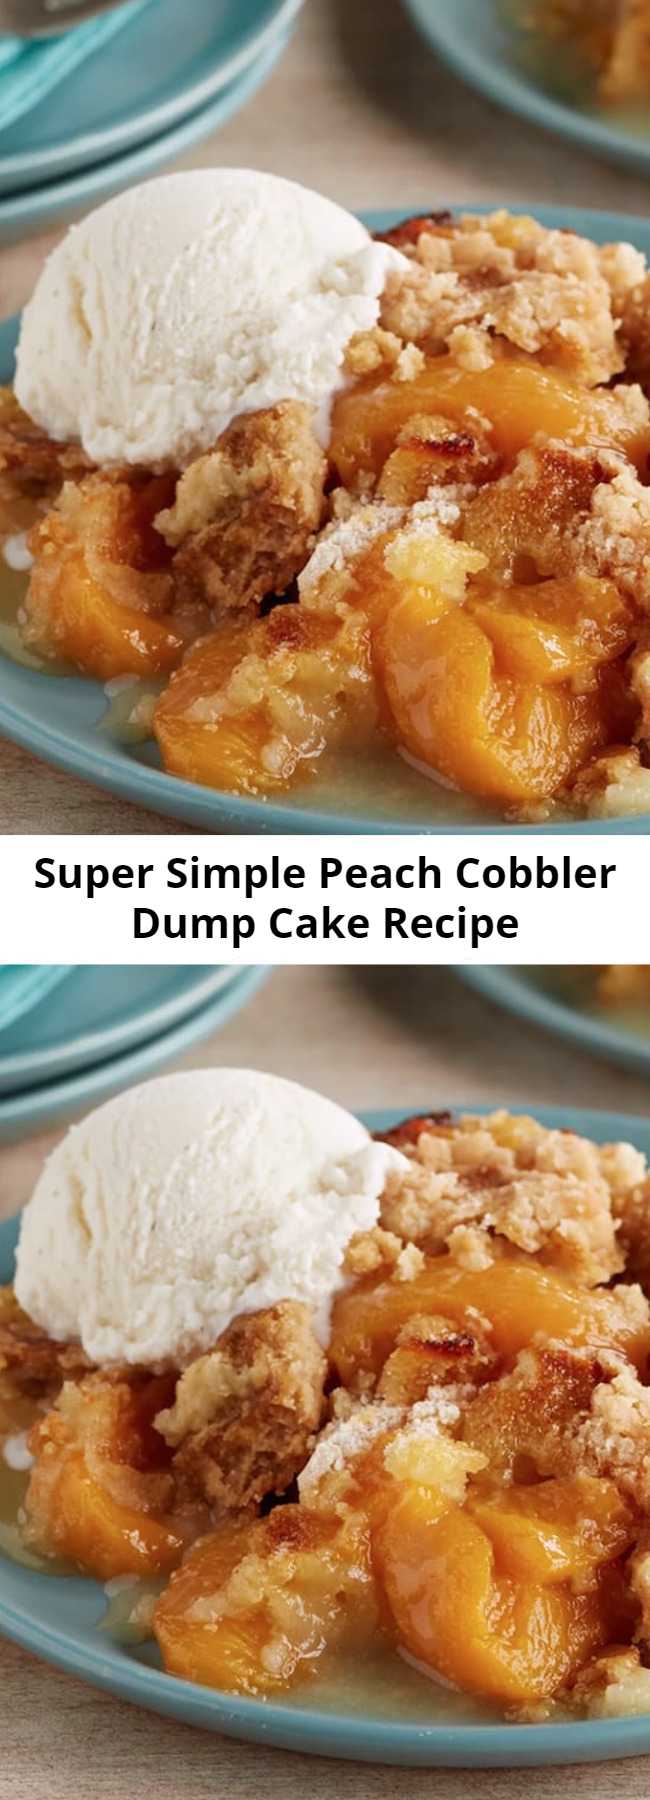 Super Simple Peach Cobbler Dump Cake Recipe - A super-simple sweet comfort food, made with 3 ingredients! No mixer, no eggs! Just layer fruit, dry cake mix and butter right in the baking dish, and a delicious dessert bakes up that’s somewhere between a cobbler and a fruit crisp. Keep it good and simple, or try a variation to twist up the fun.